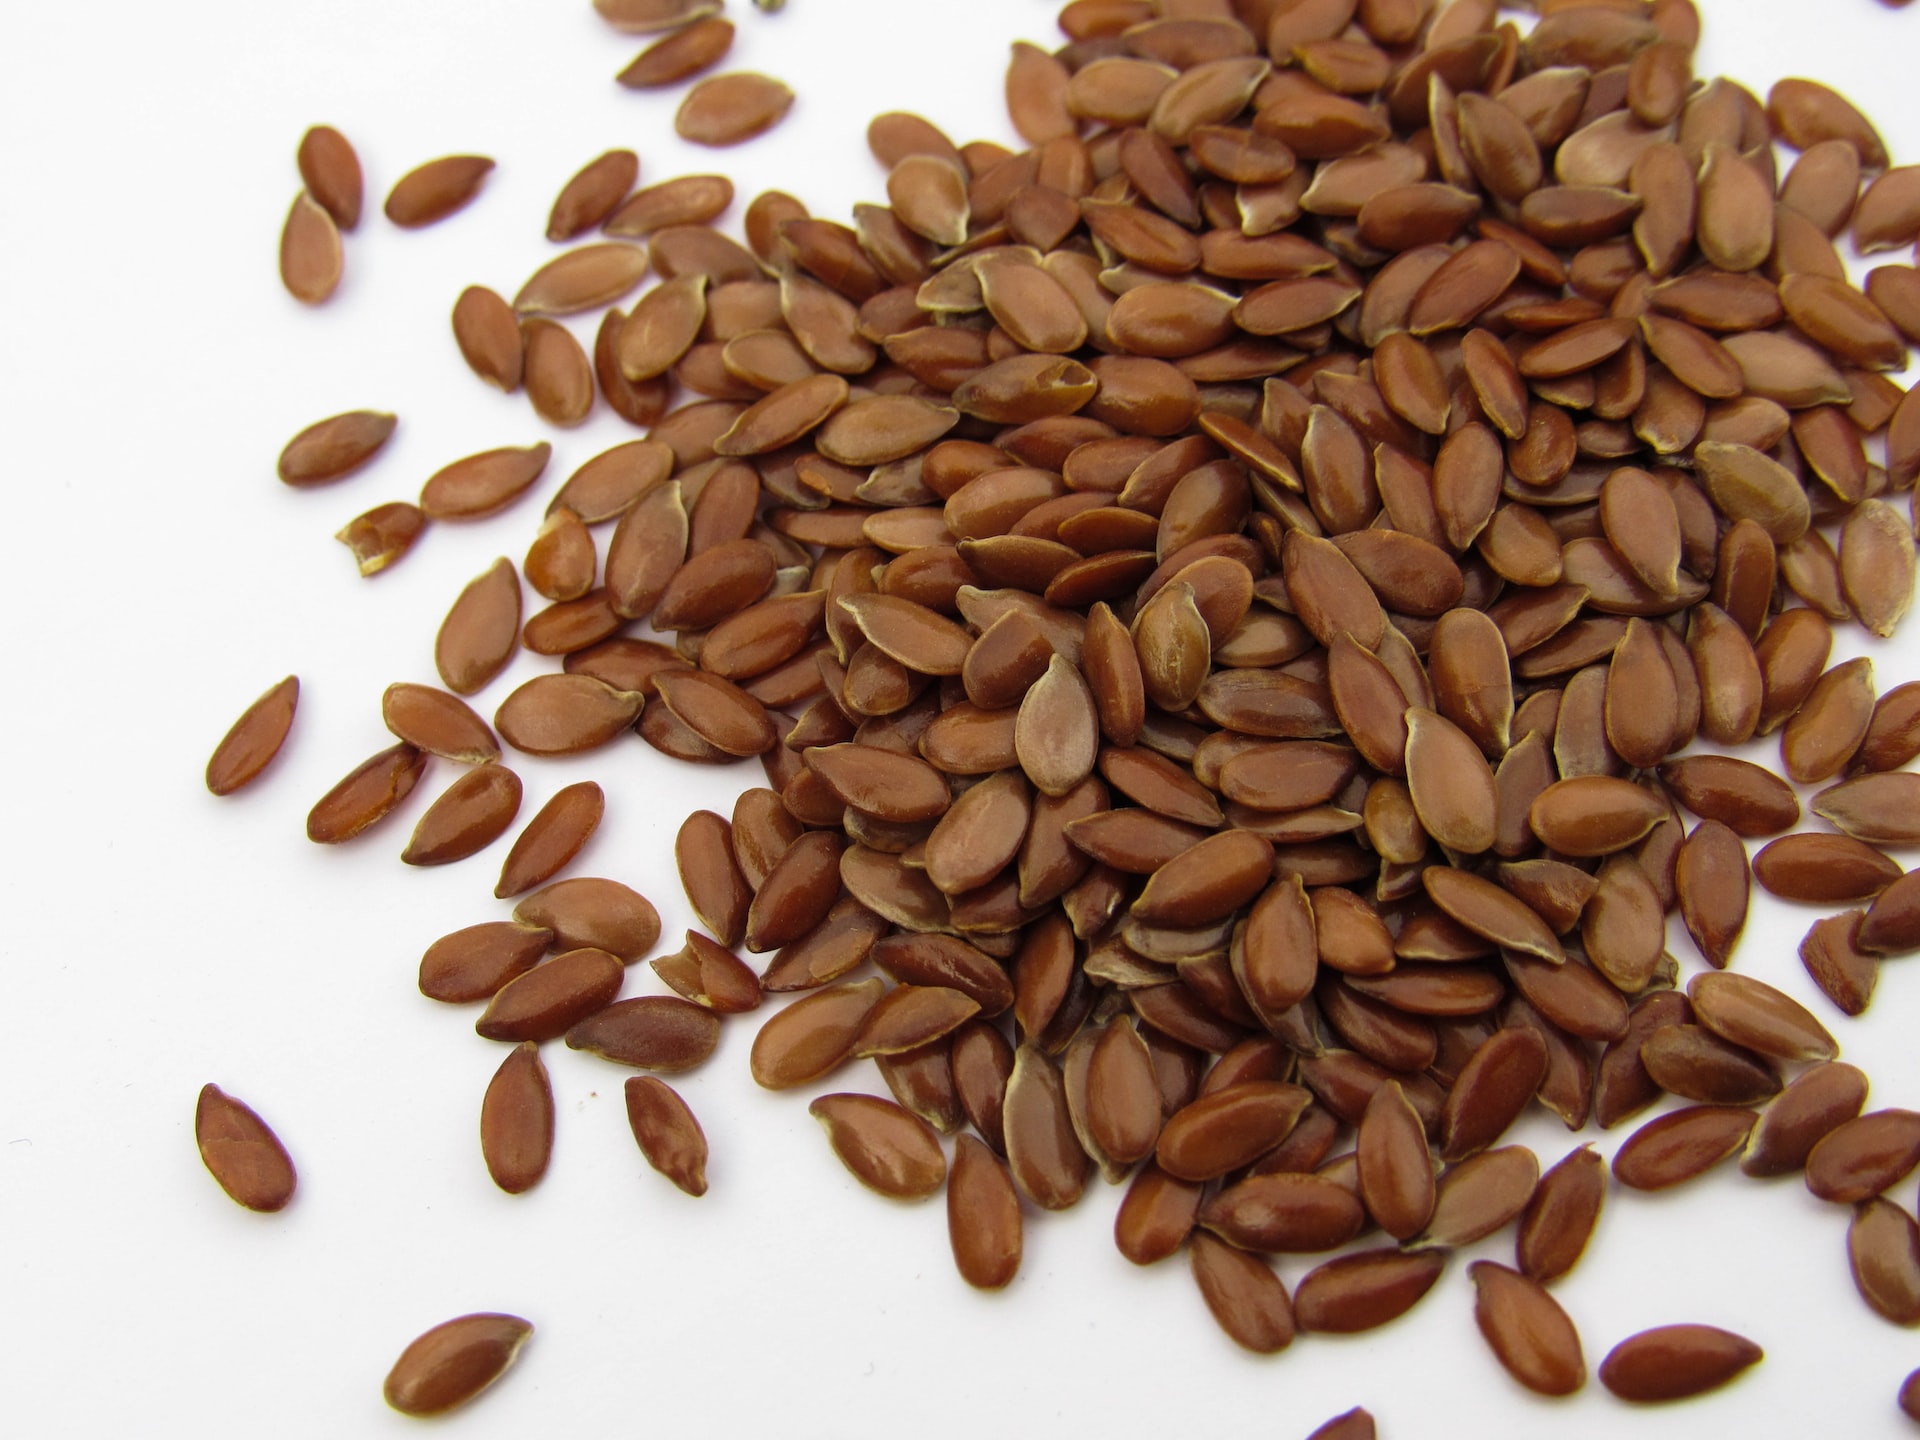 Flaxseed is gold for hair. How to use it to grow thick and shiny hair?